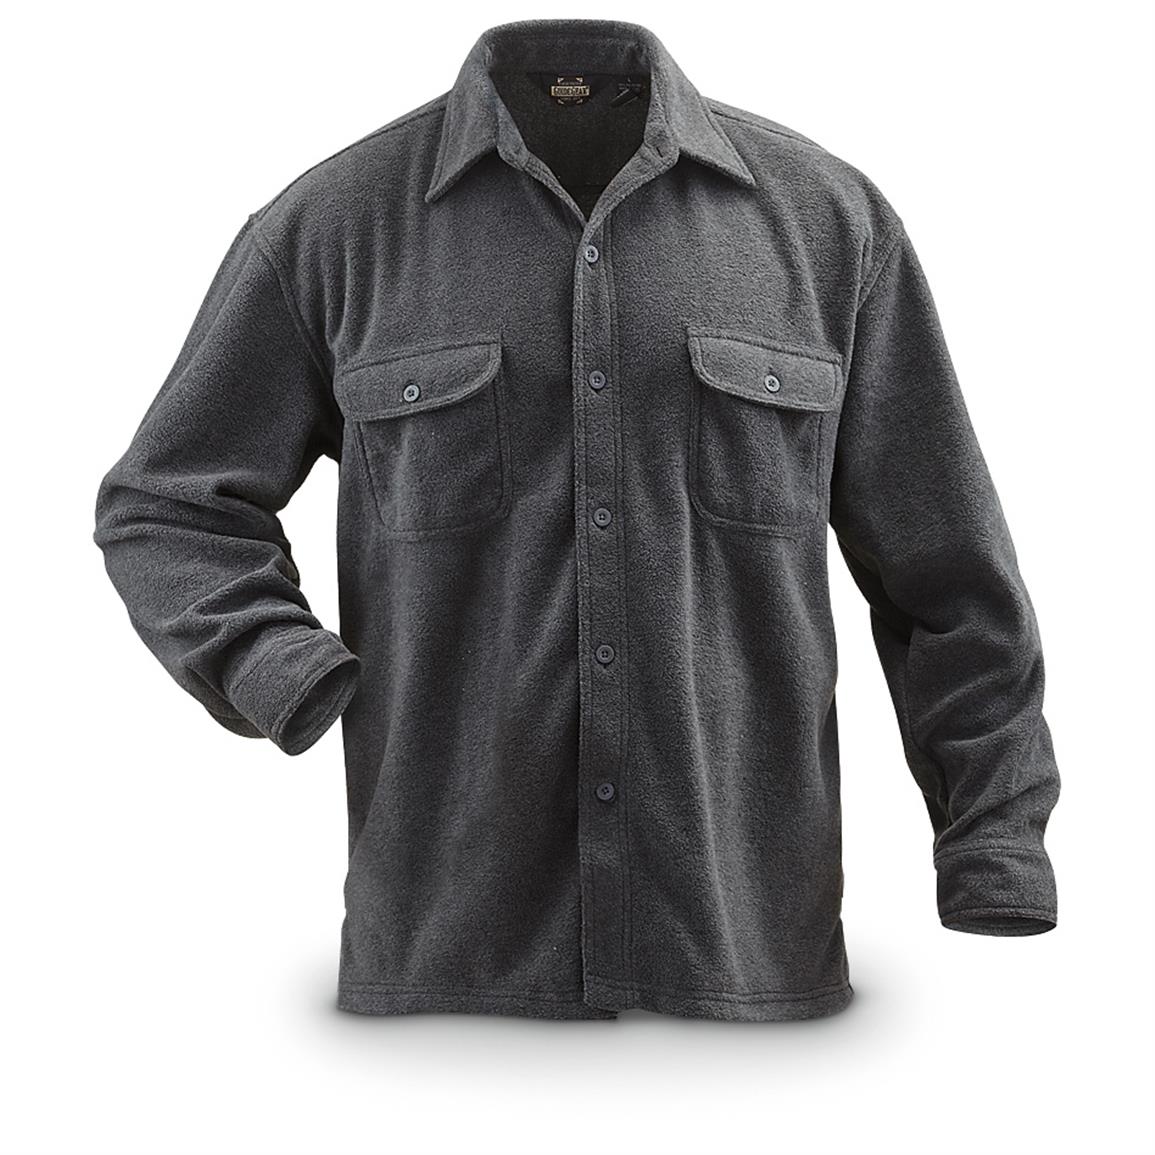 Guide Gear Men's CPO Shirt - 293306, Shirts at Sportsman's Guide